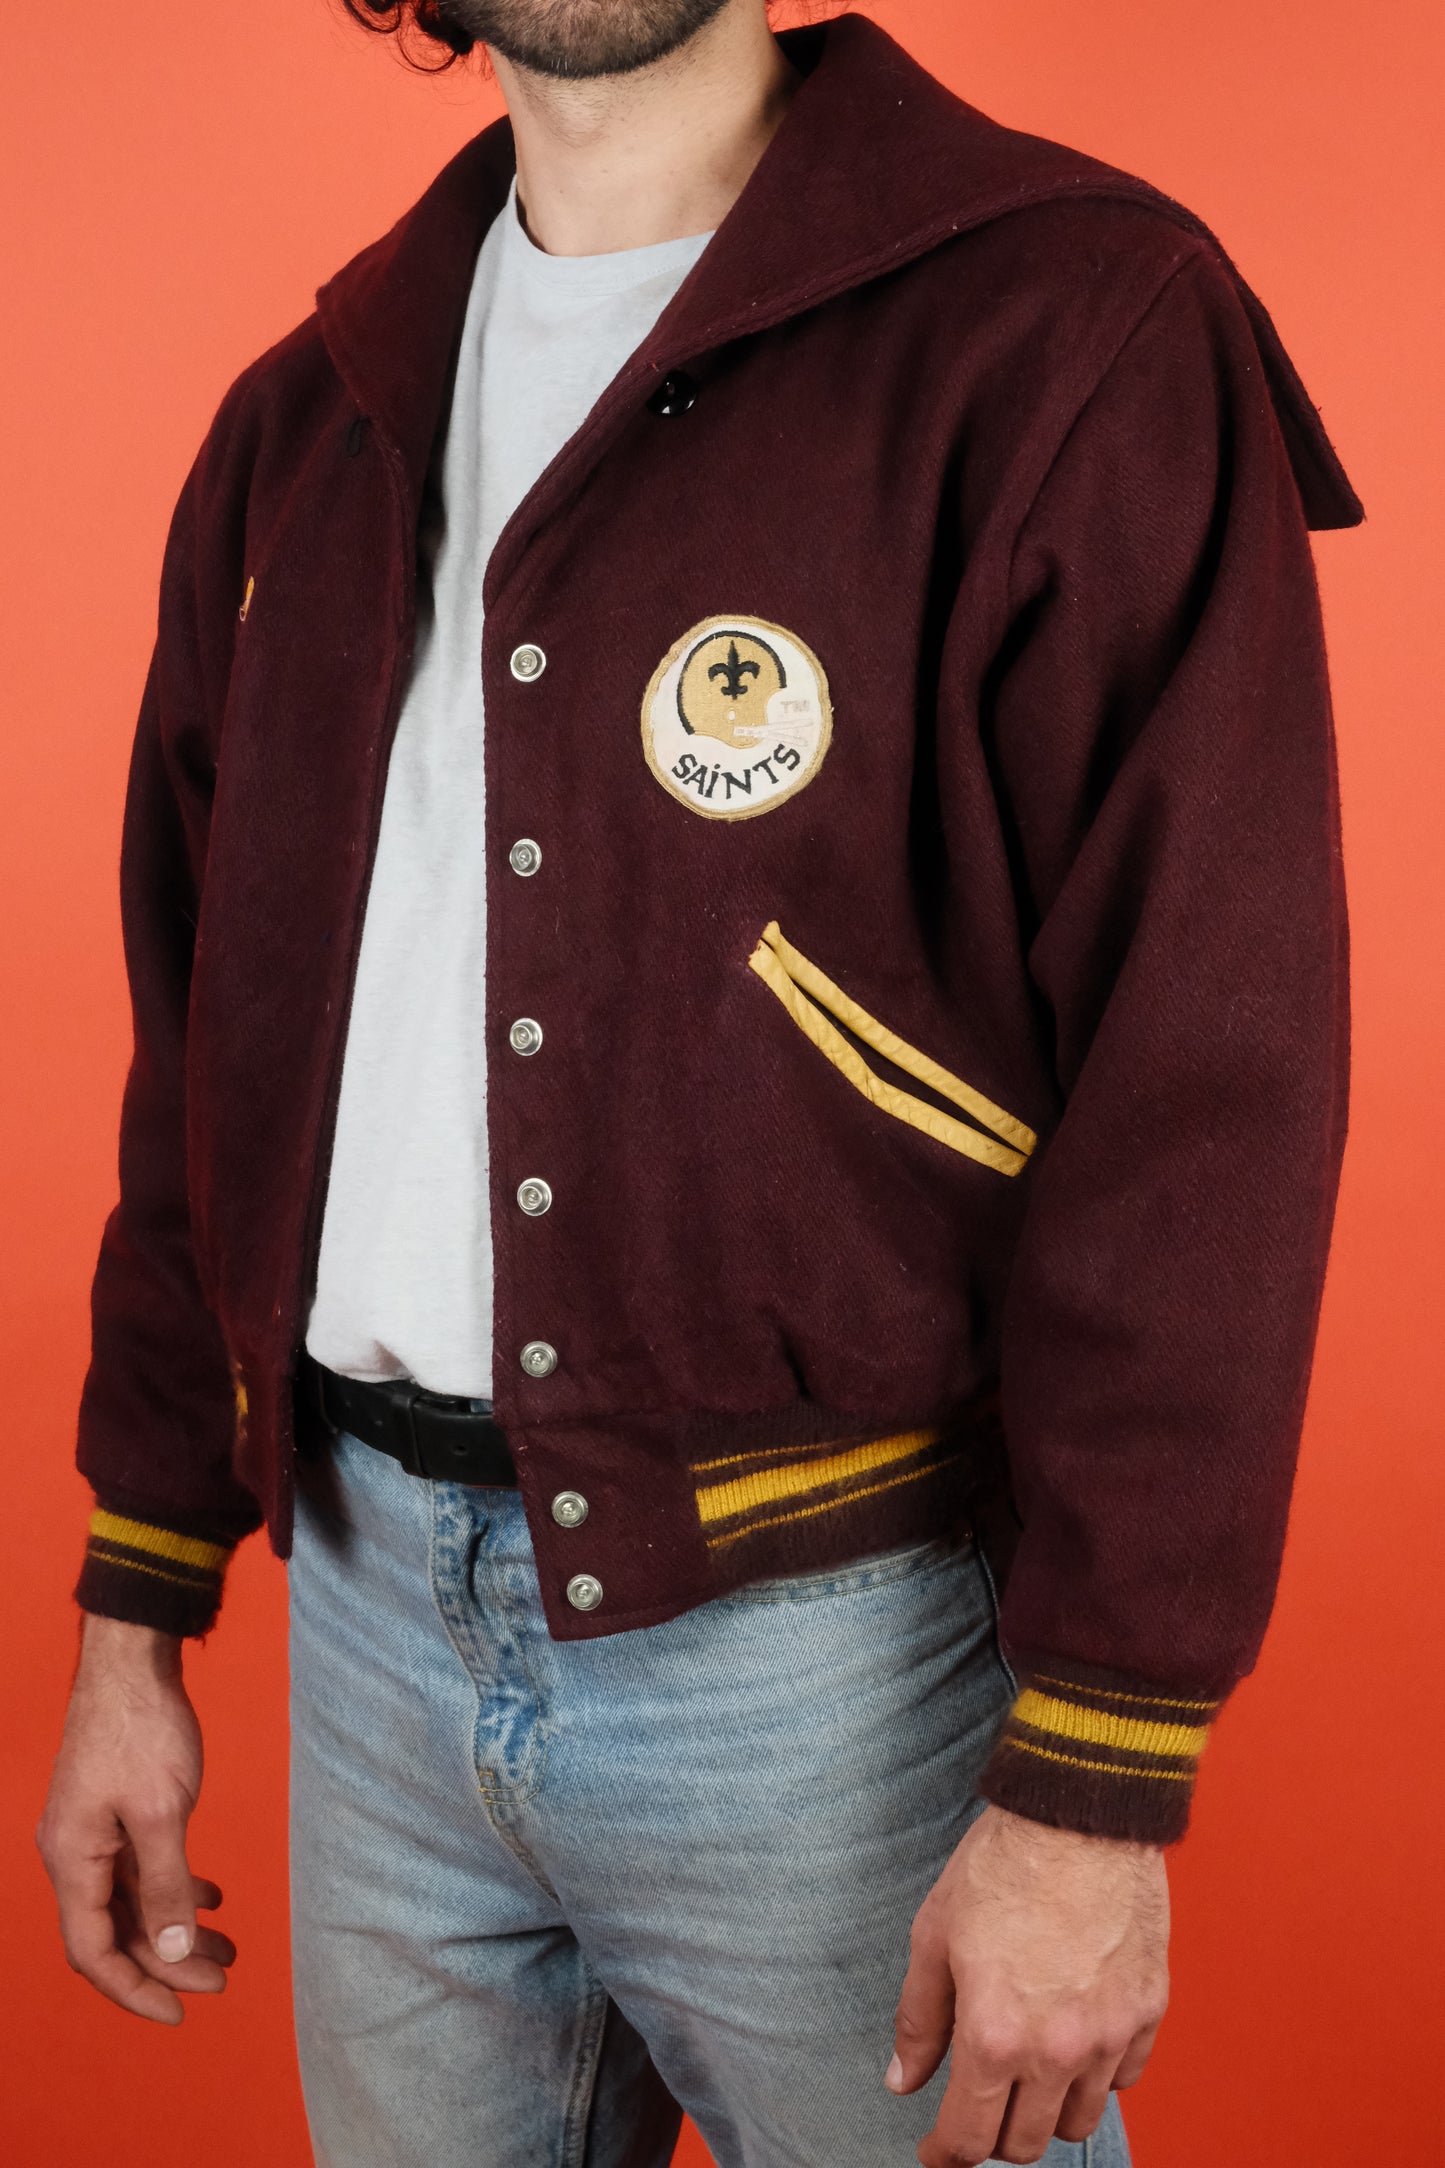 Butwin Varsity Jacket 'L' Made in USA - vintage clothing clochard92.com